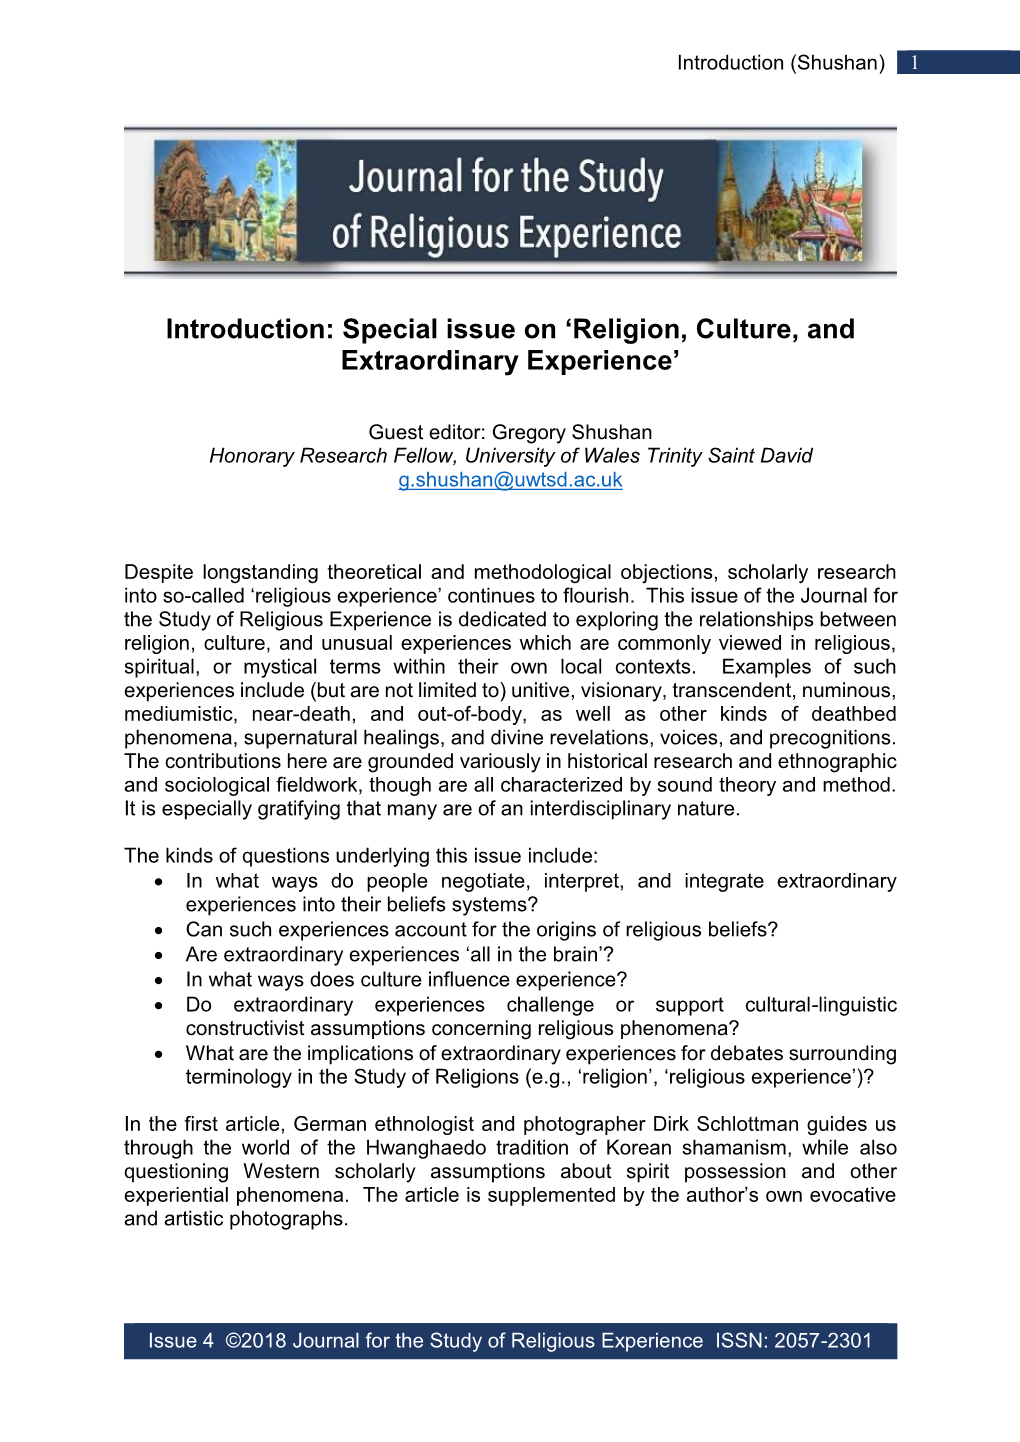 Special Issue on ‘Religion, Culture, and Extraordinary Experience’